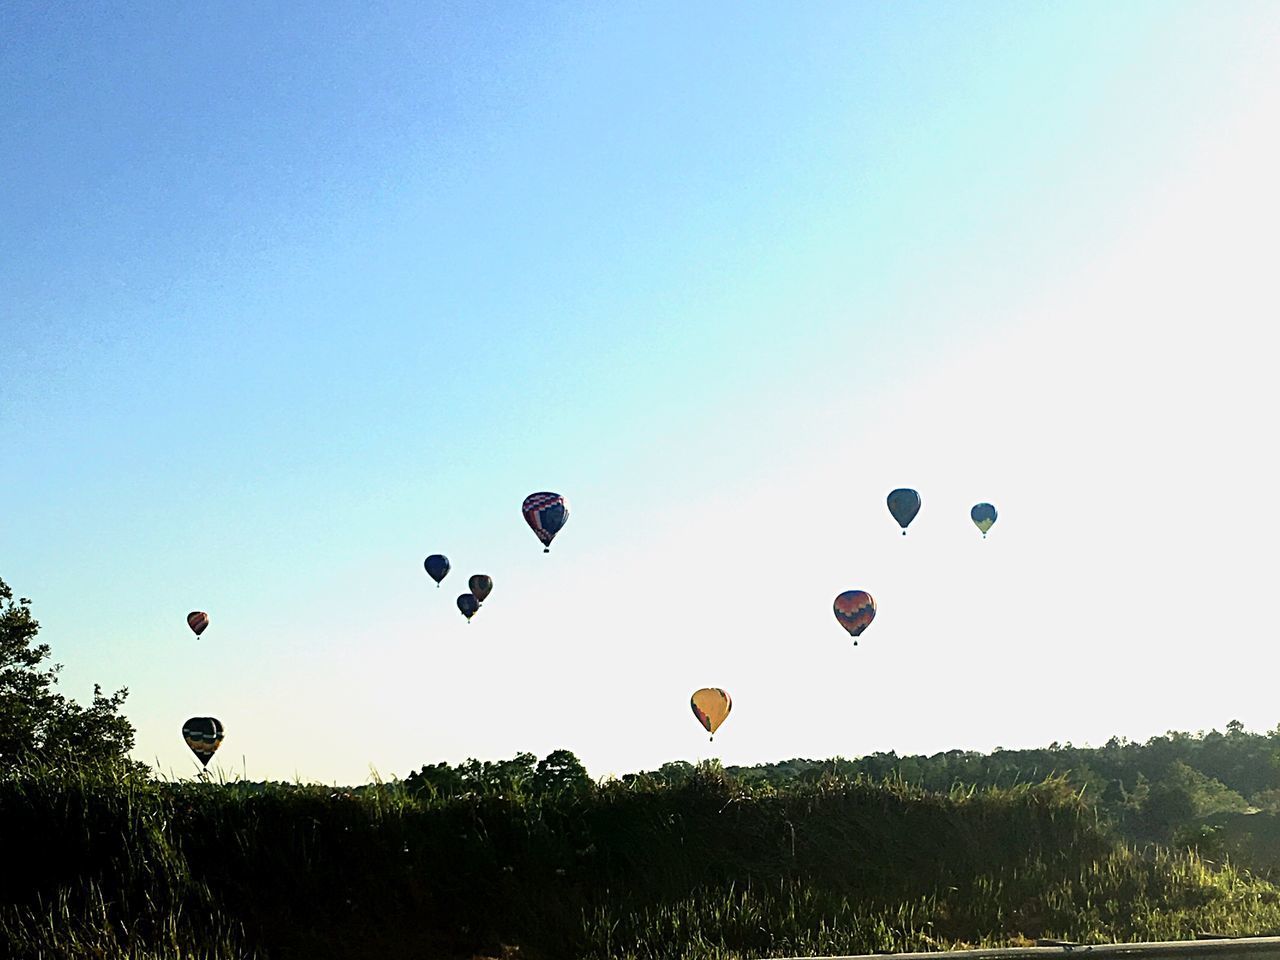 VIEW OF HOT AIR BALLOONS AGAINST BLUE SKY